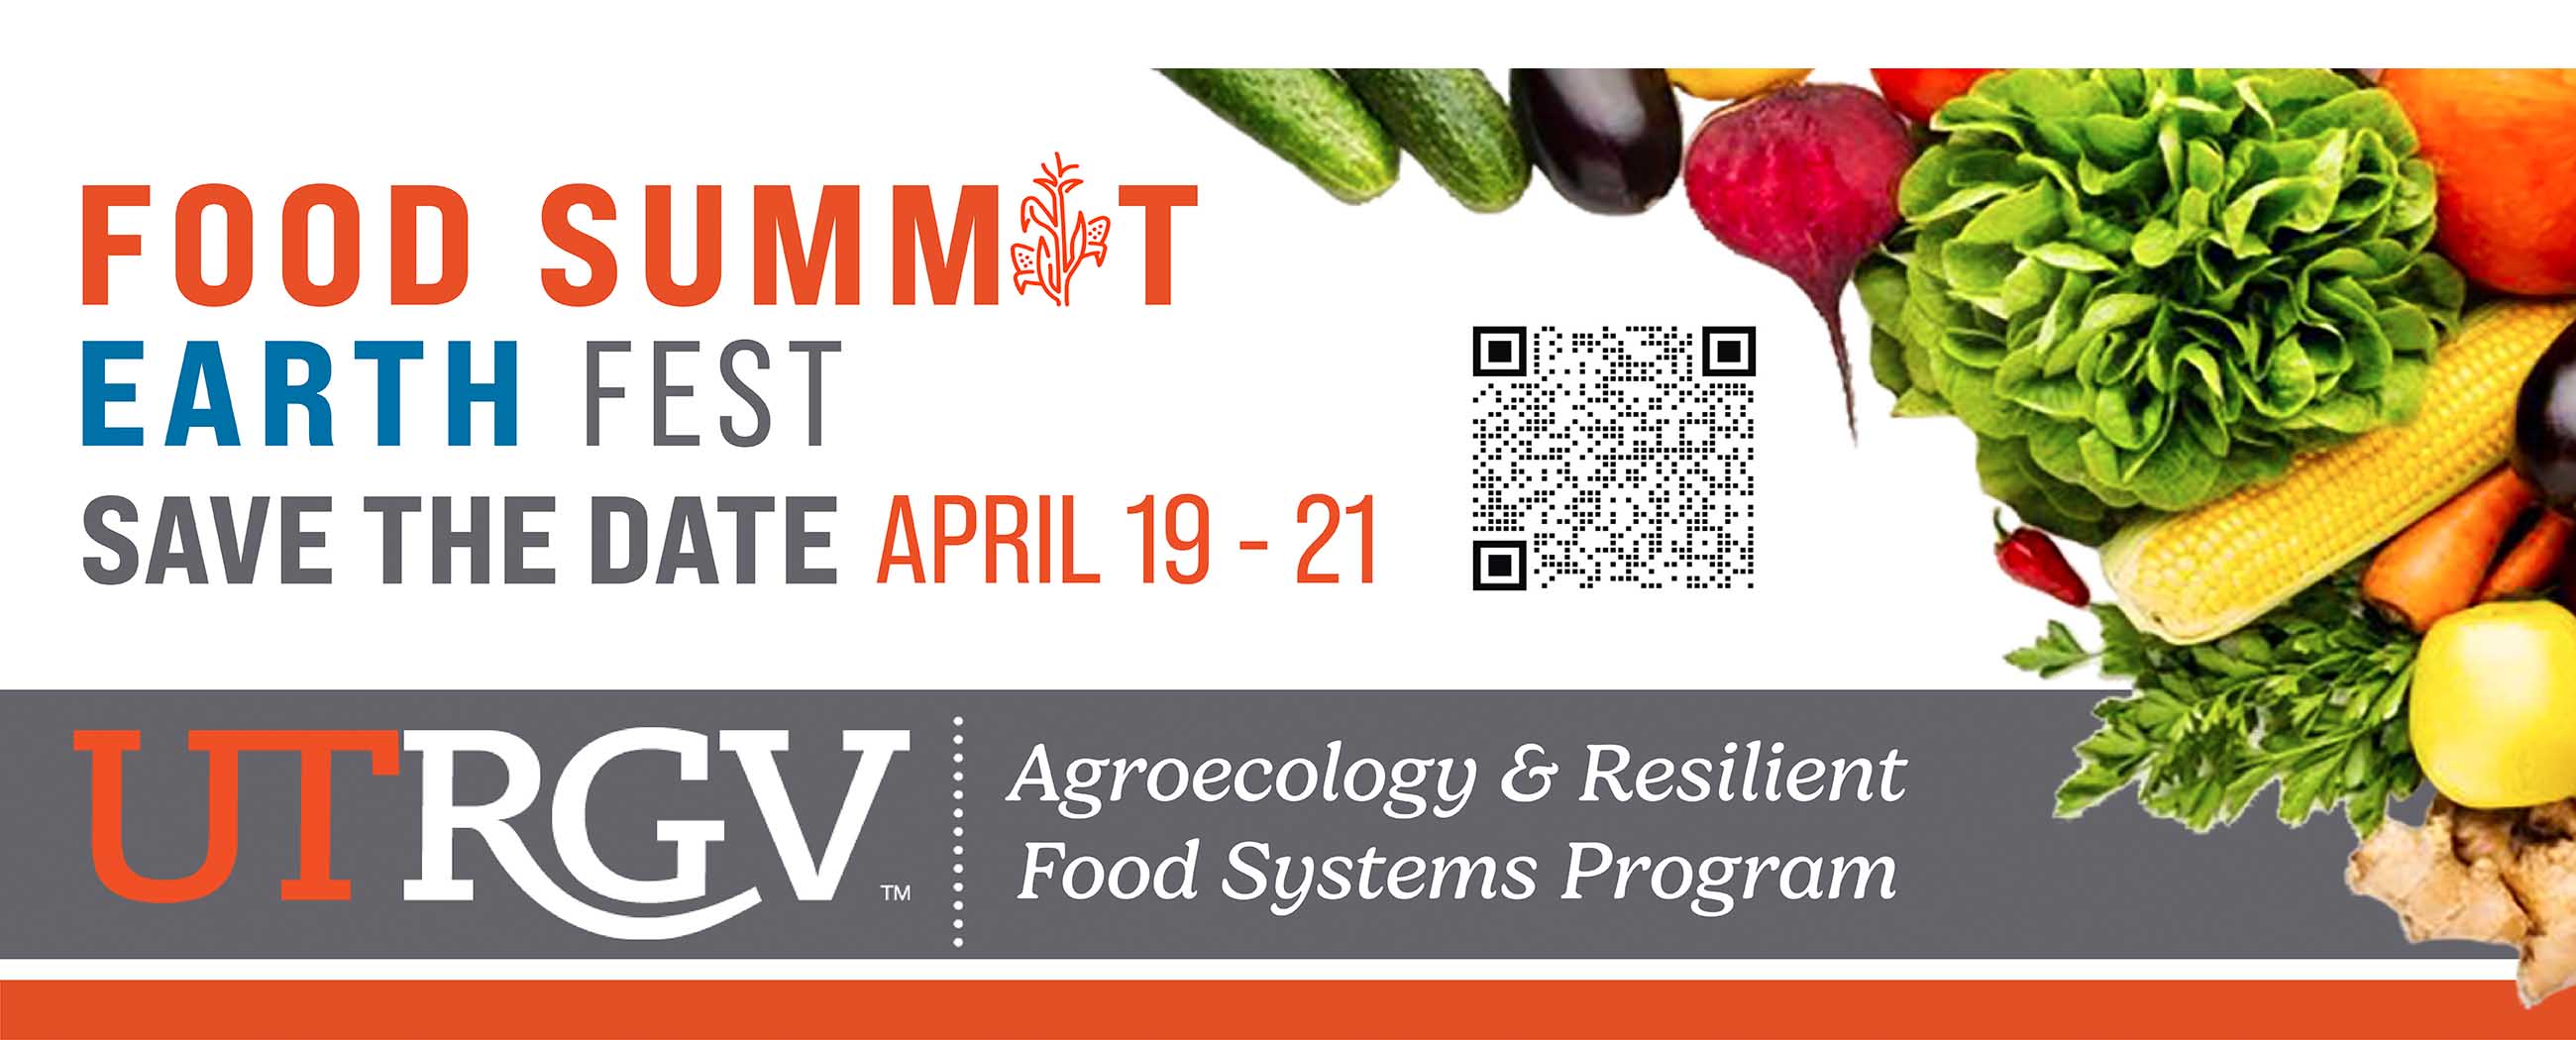 Food Summit Earth Fest from April 19 to April 21 Page Banner 